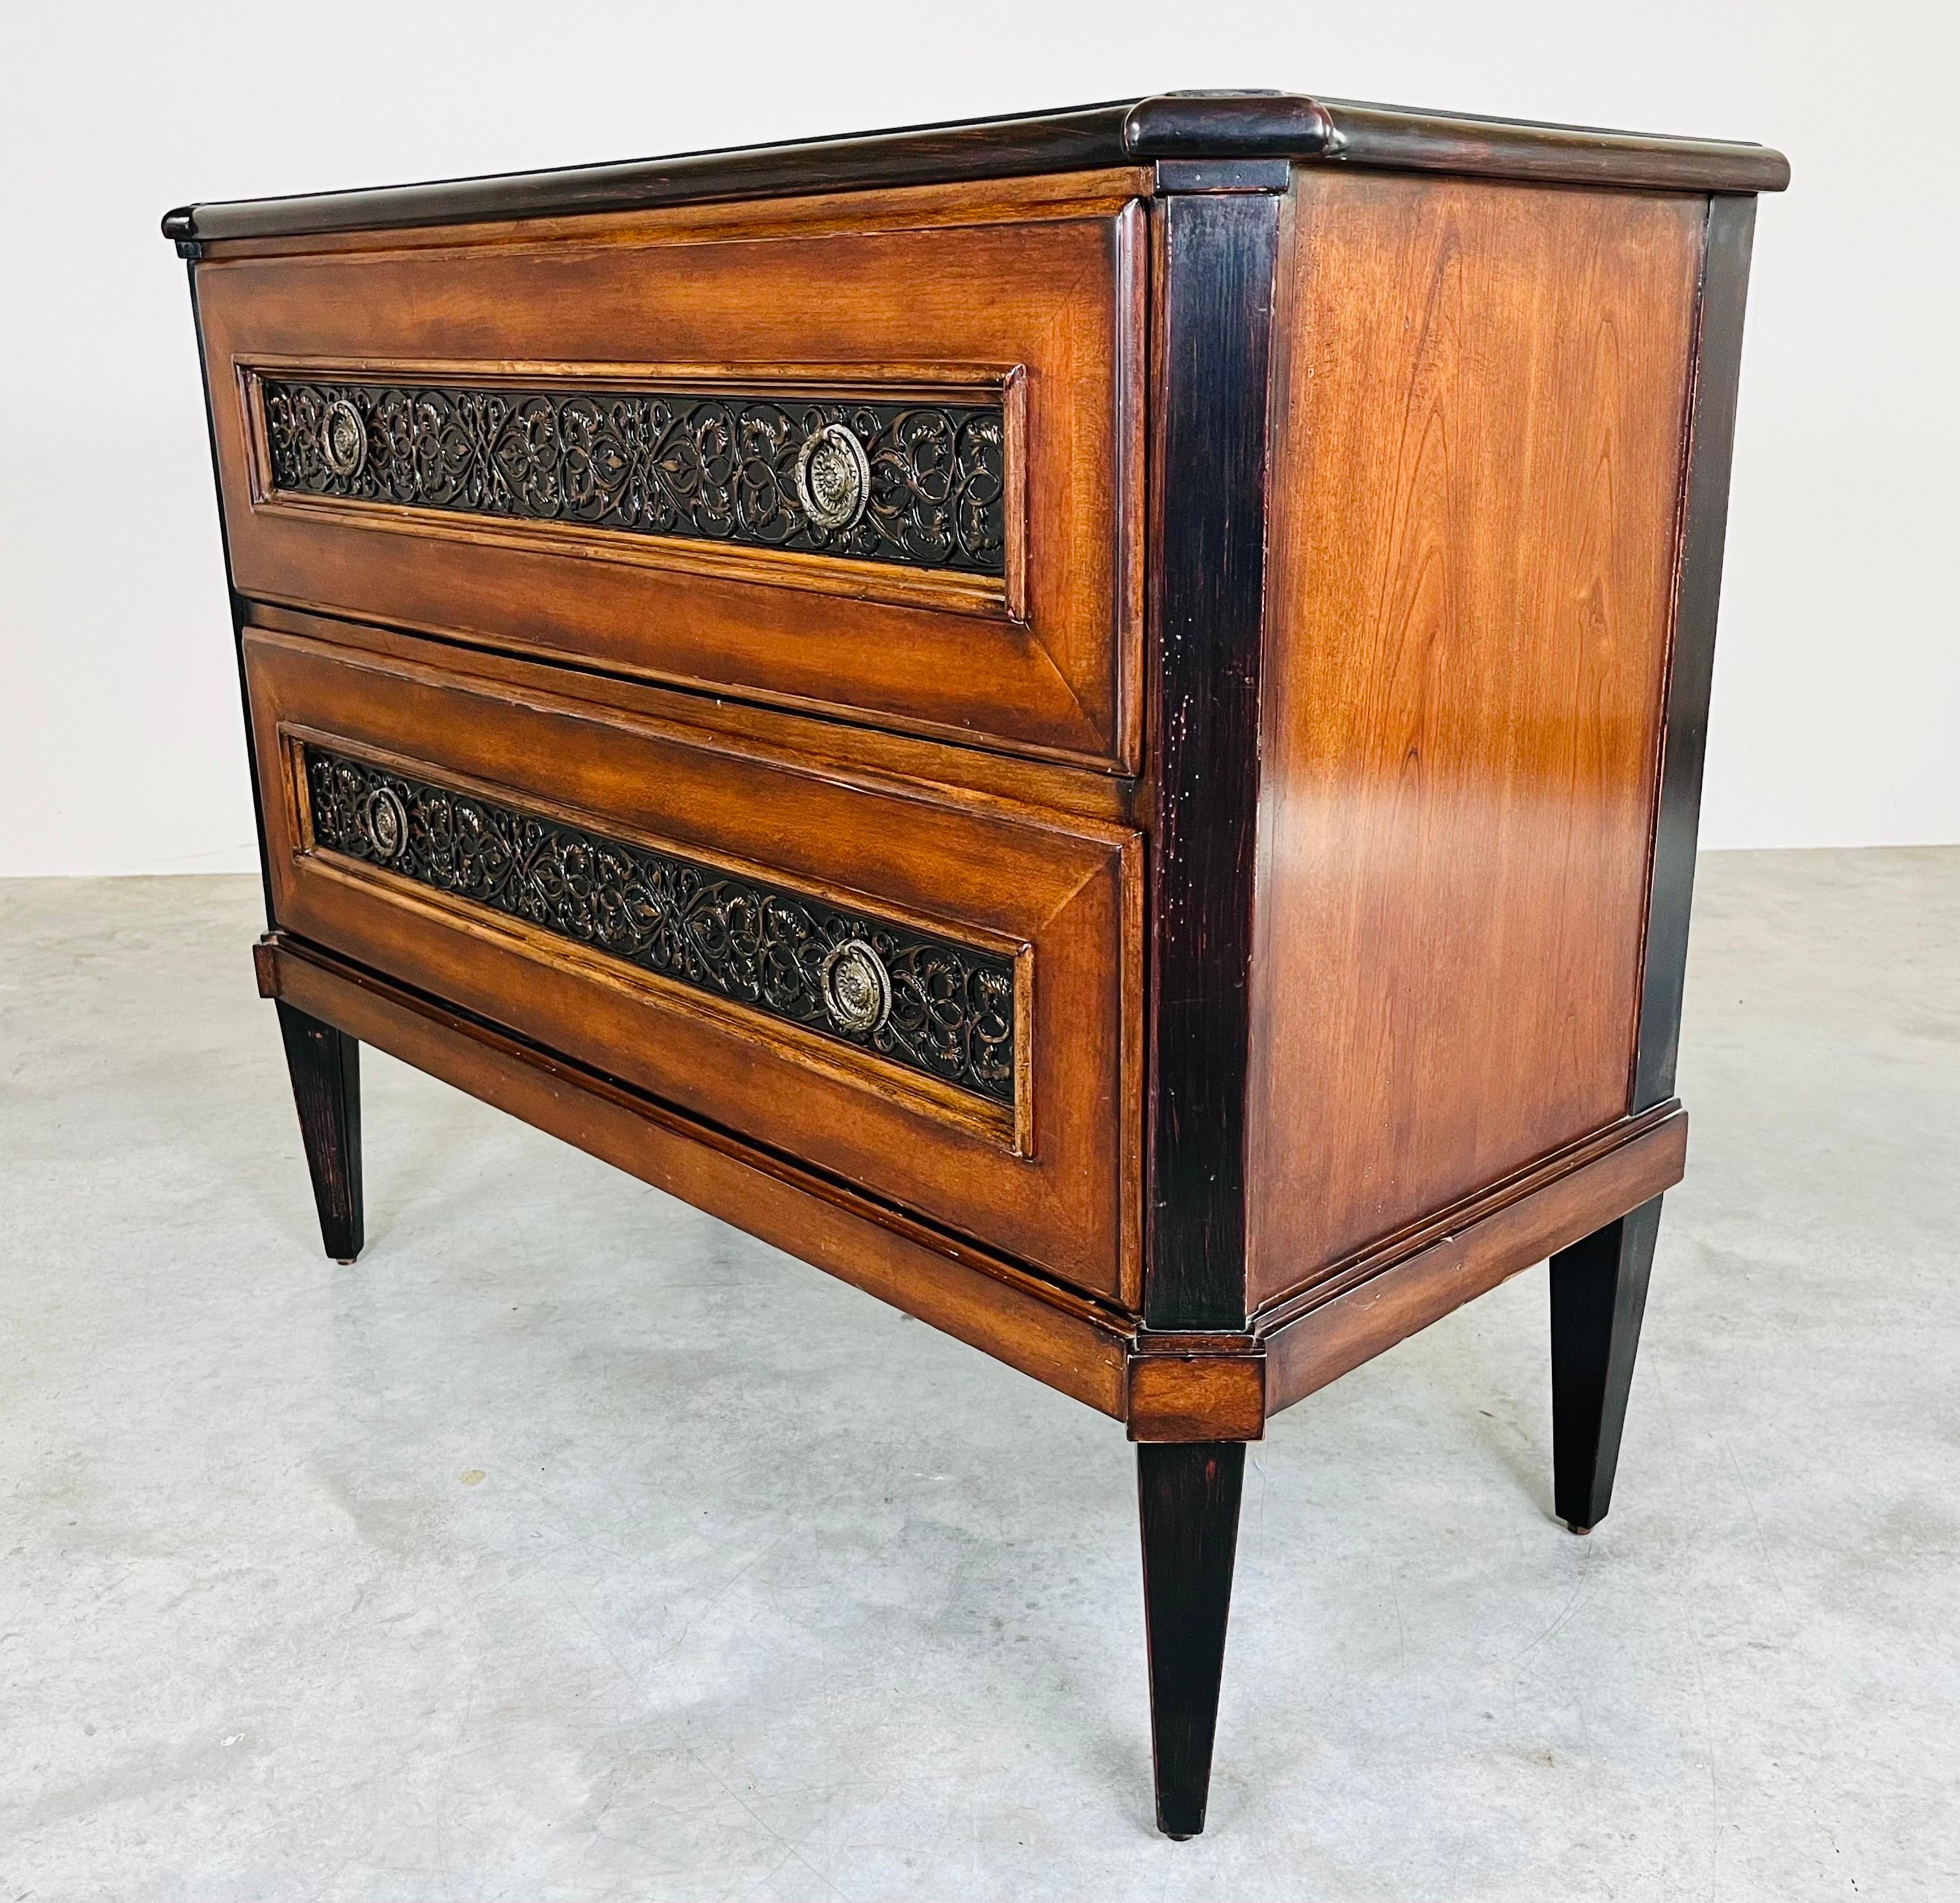 Baker Milling Road French Country 2 drawer cherry and burlwood commode chest of drawers or dresser having solid wood construction with beautiful wood grain throughout and drawer fronts adorned with baroque brass details. Original Baker label plate